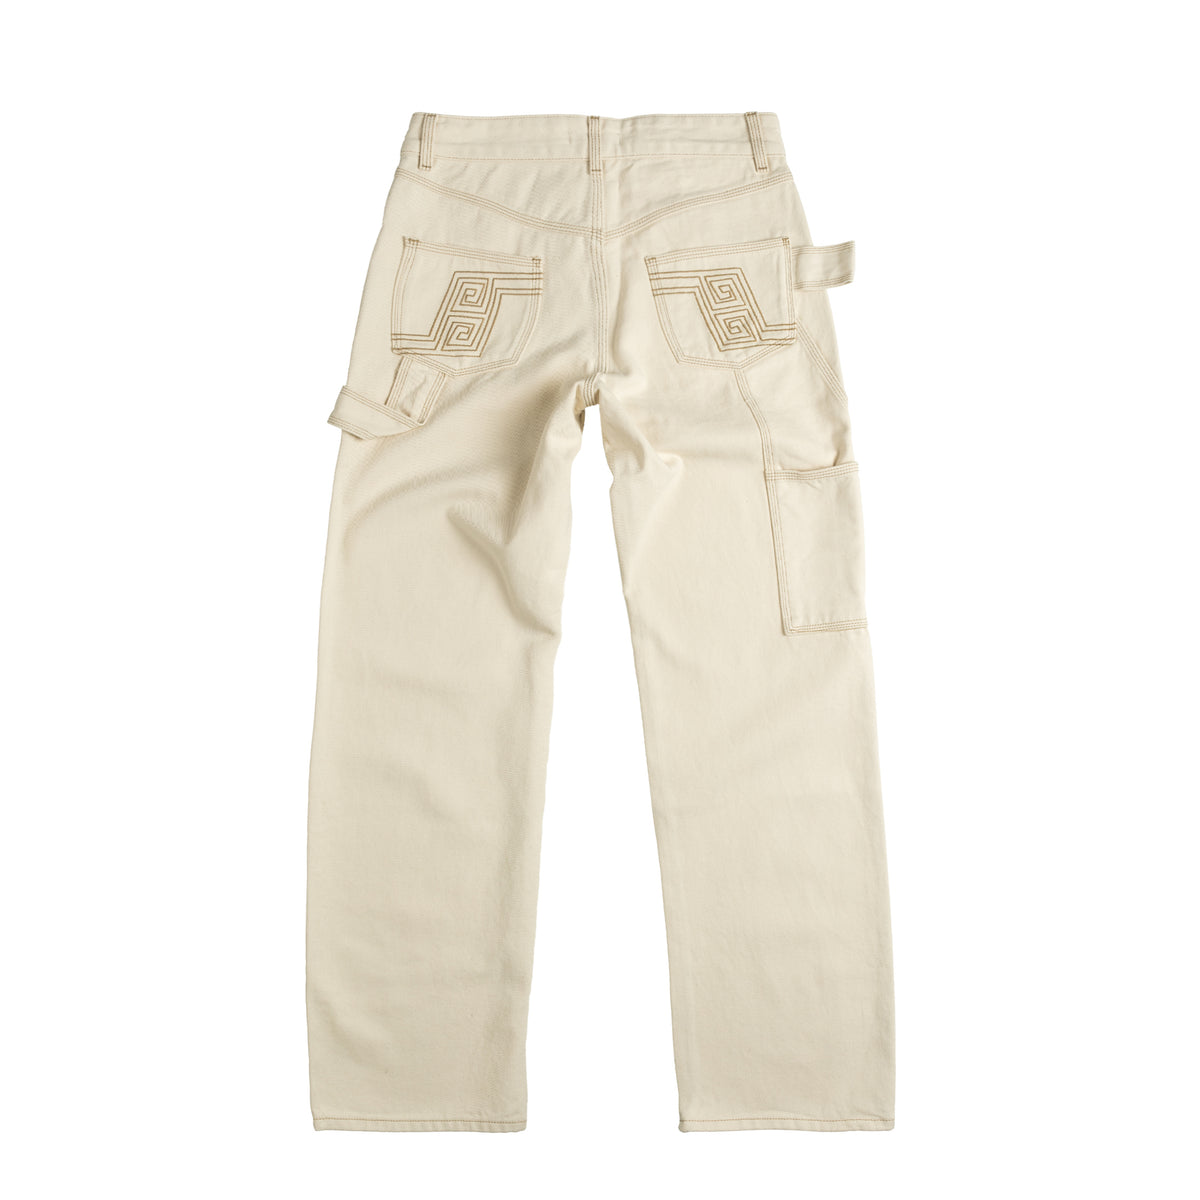 Perplex Workwear Jeans – buy now at Asphaltgold Online Store!